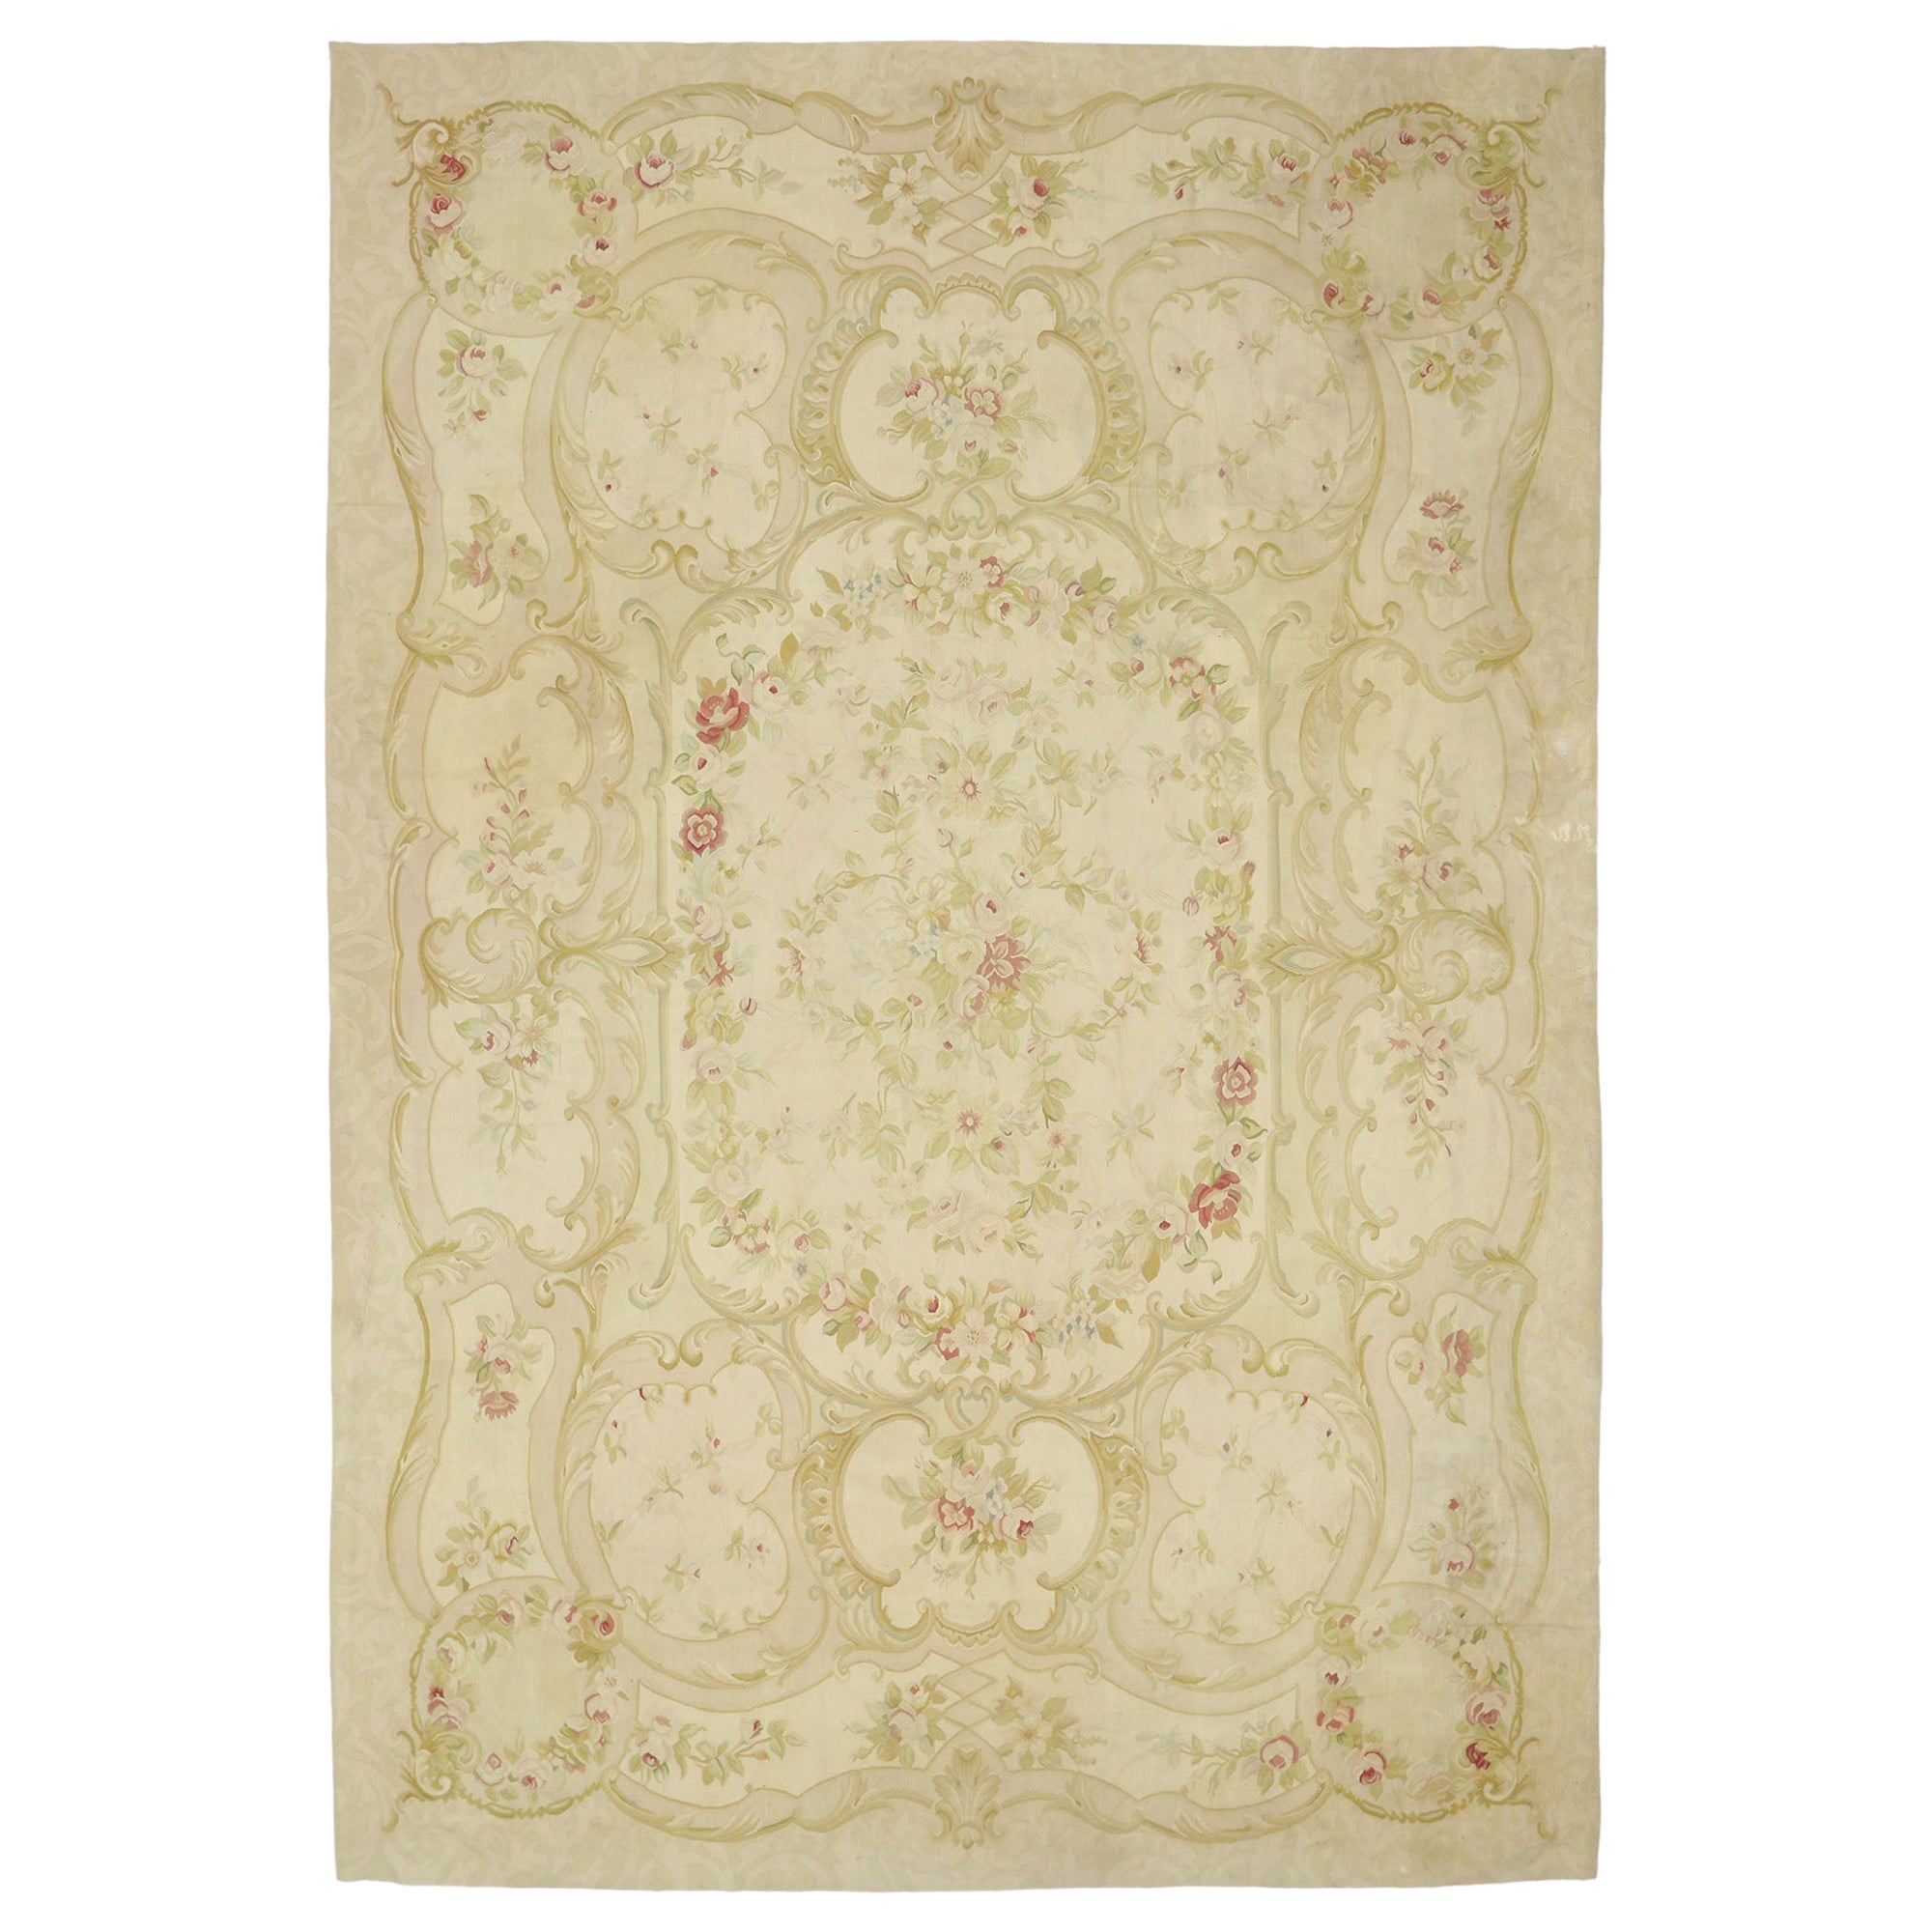 Vintage French Aubusson Rug with Romantic Rococo Style